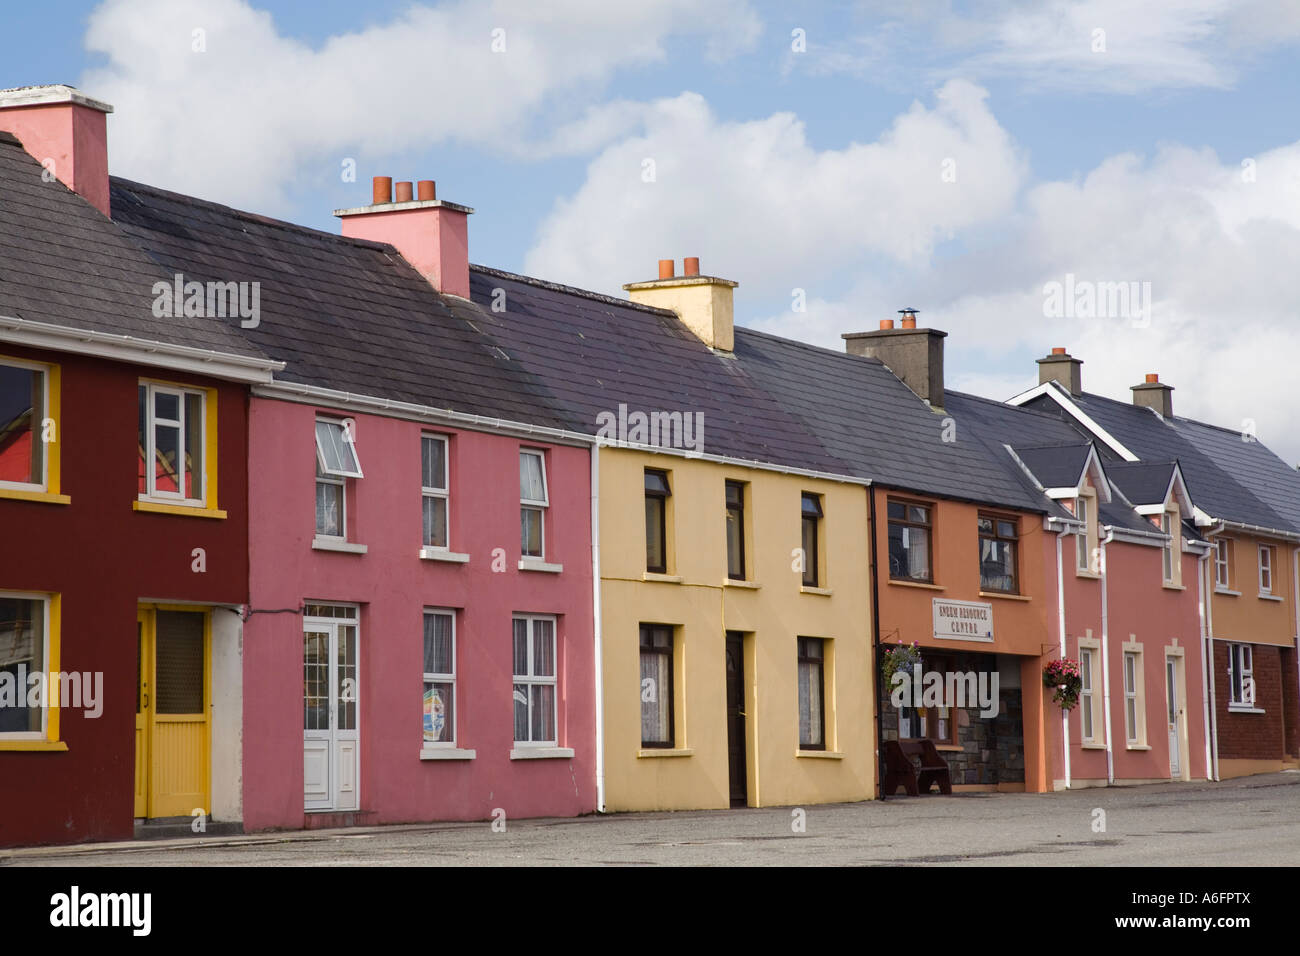 Sneem Ireland Row of traditional colourful painted houses in North Square on 'Ring of Kerry' route on Iveragh Peninsula Stock Photo